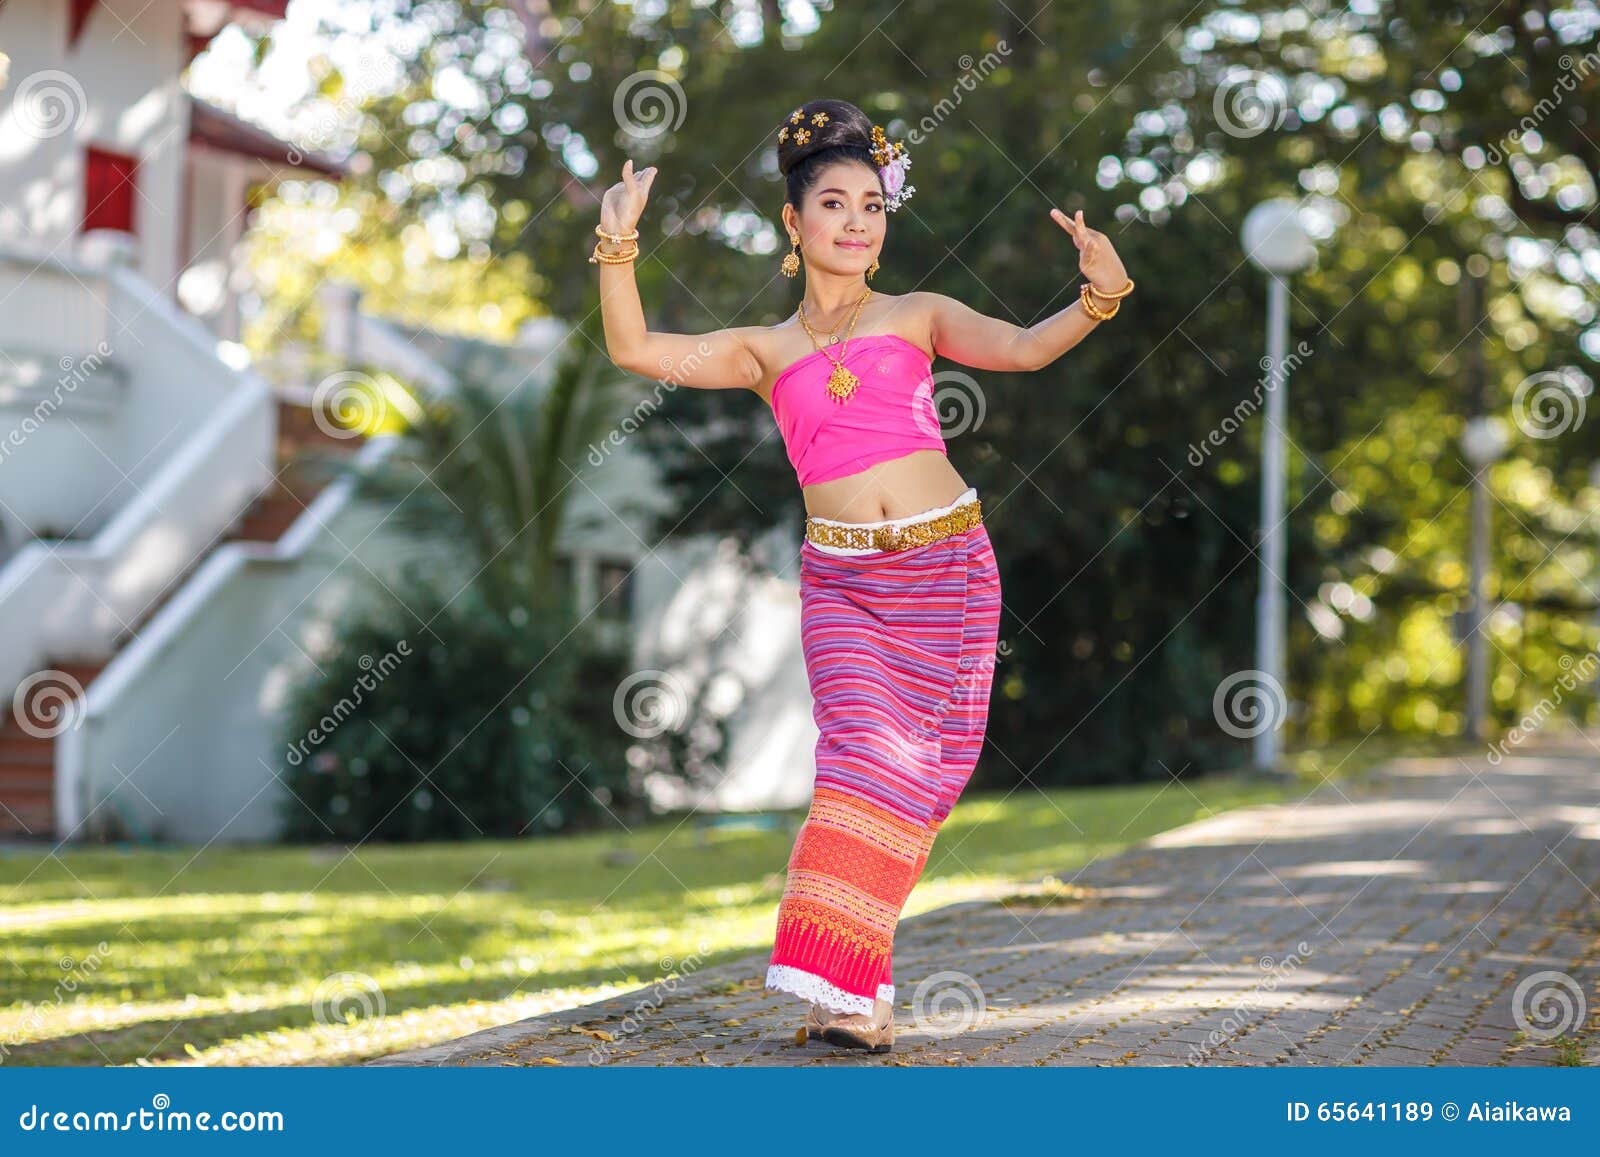 Thai Dancing Girl With Northern Style Dress In Temple Stock Image 